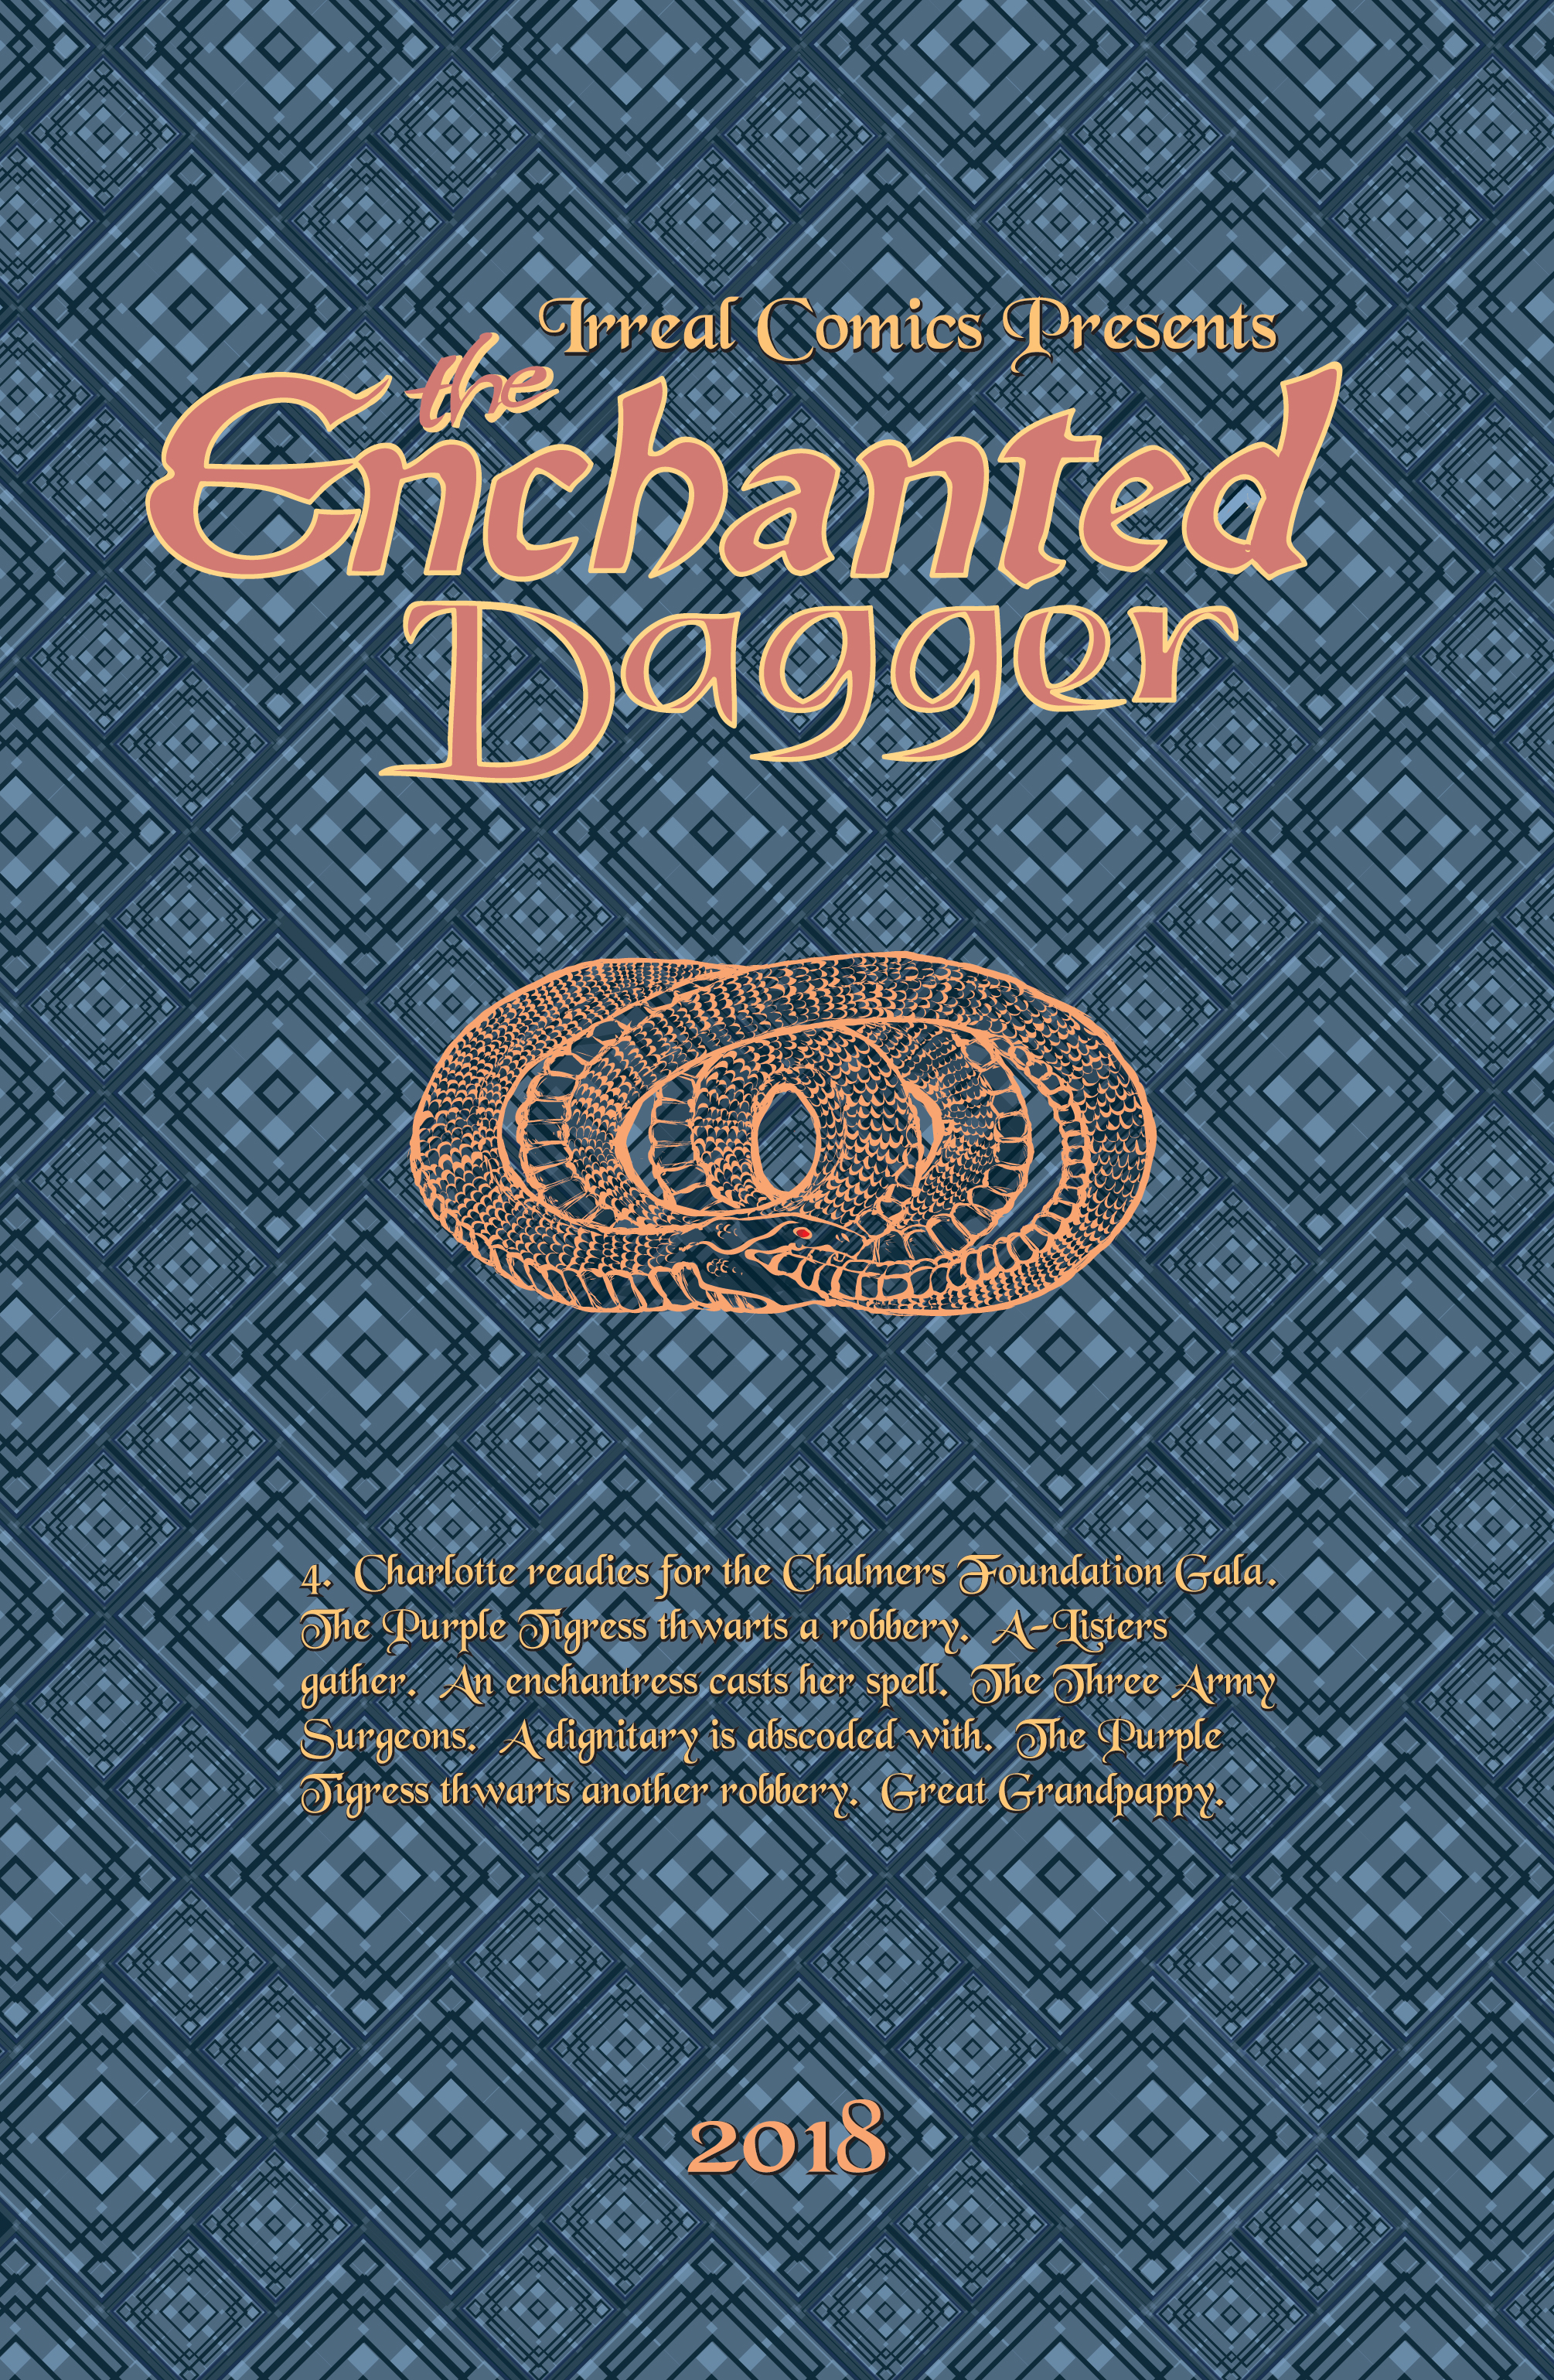 The Enchanted Dagger #4 – Inside Cover